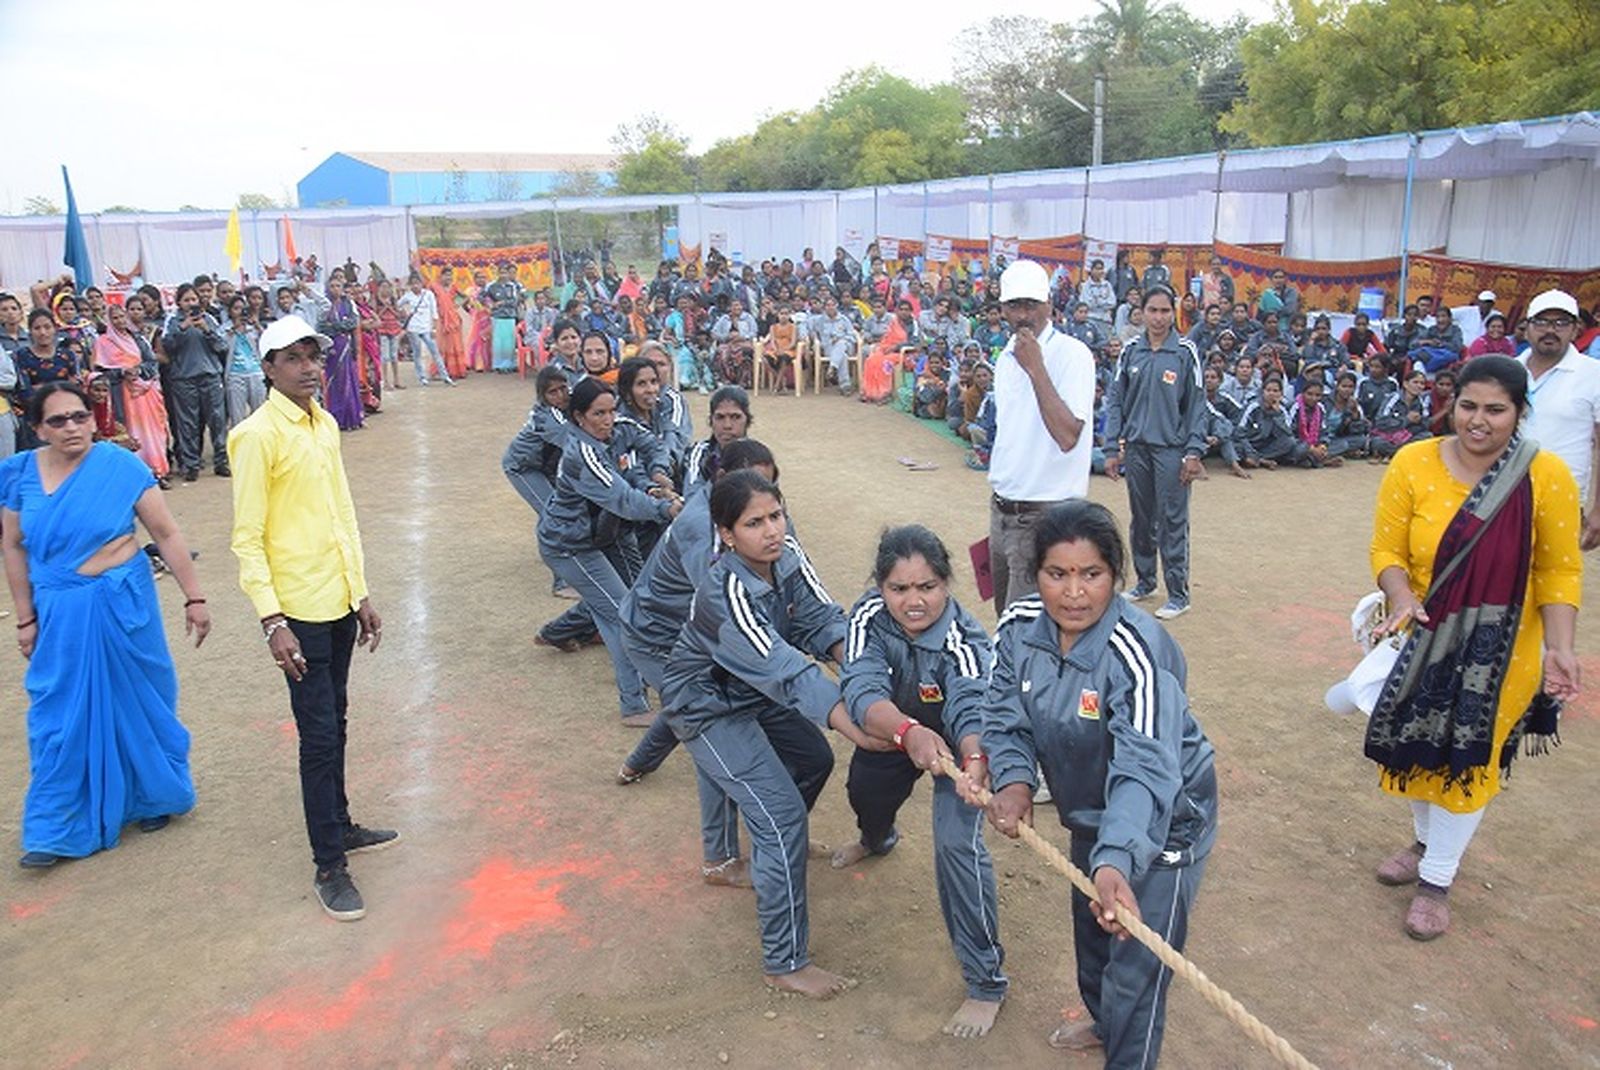 Here women showed strength in the Umang sports festival